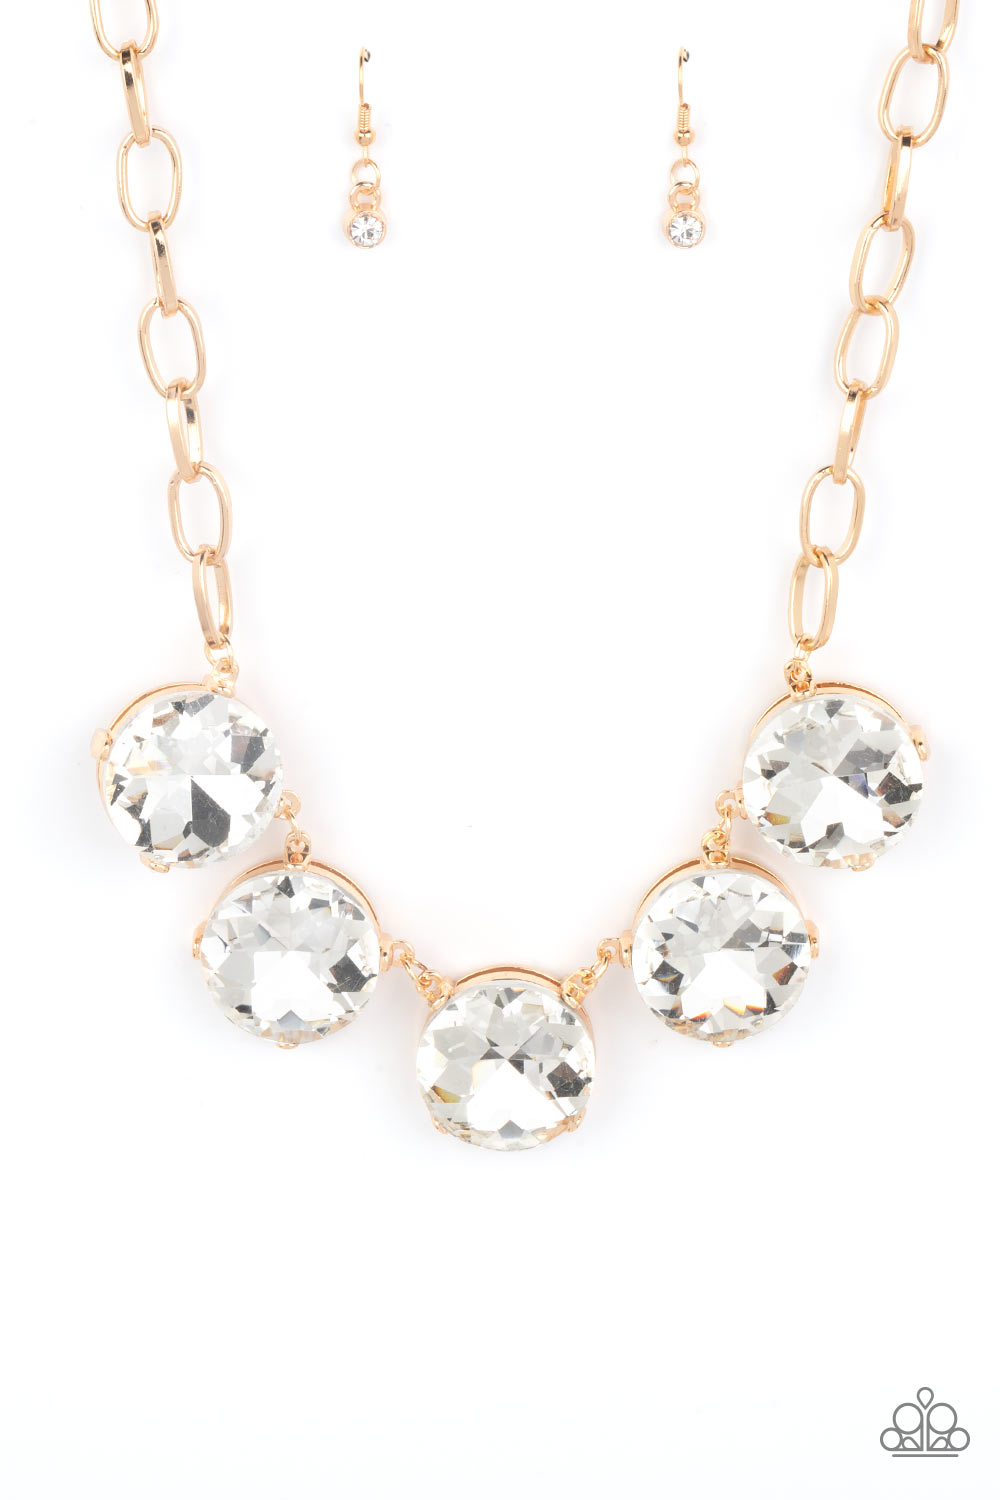 Limelight Luxury Necklace (White, Gold, Multi)